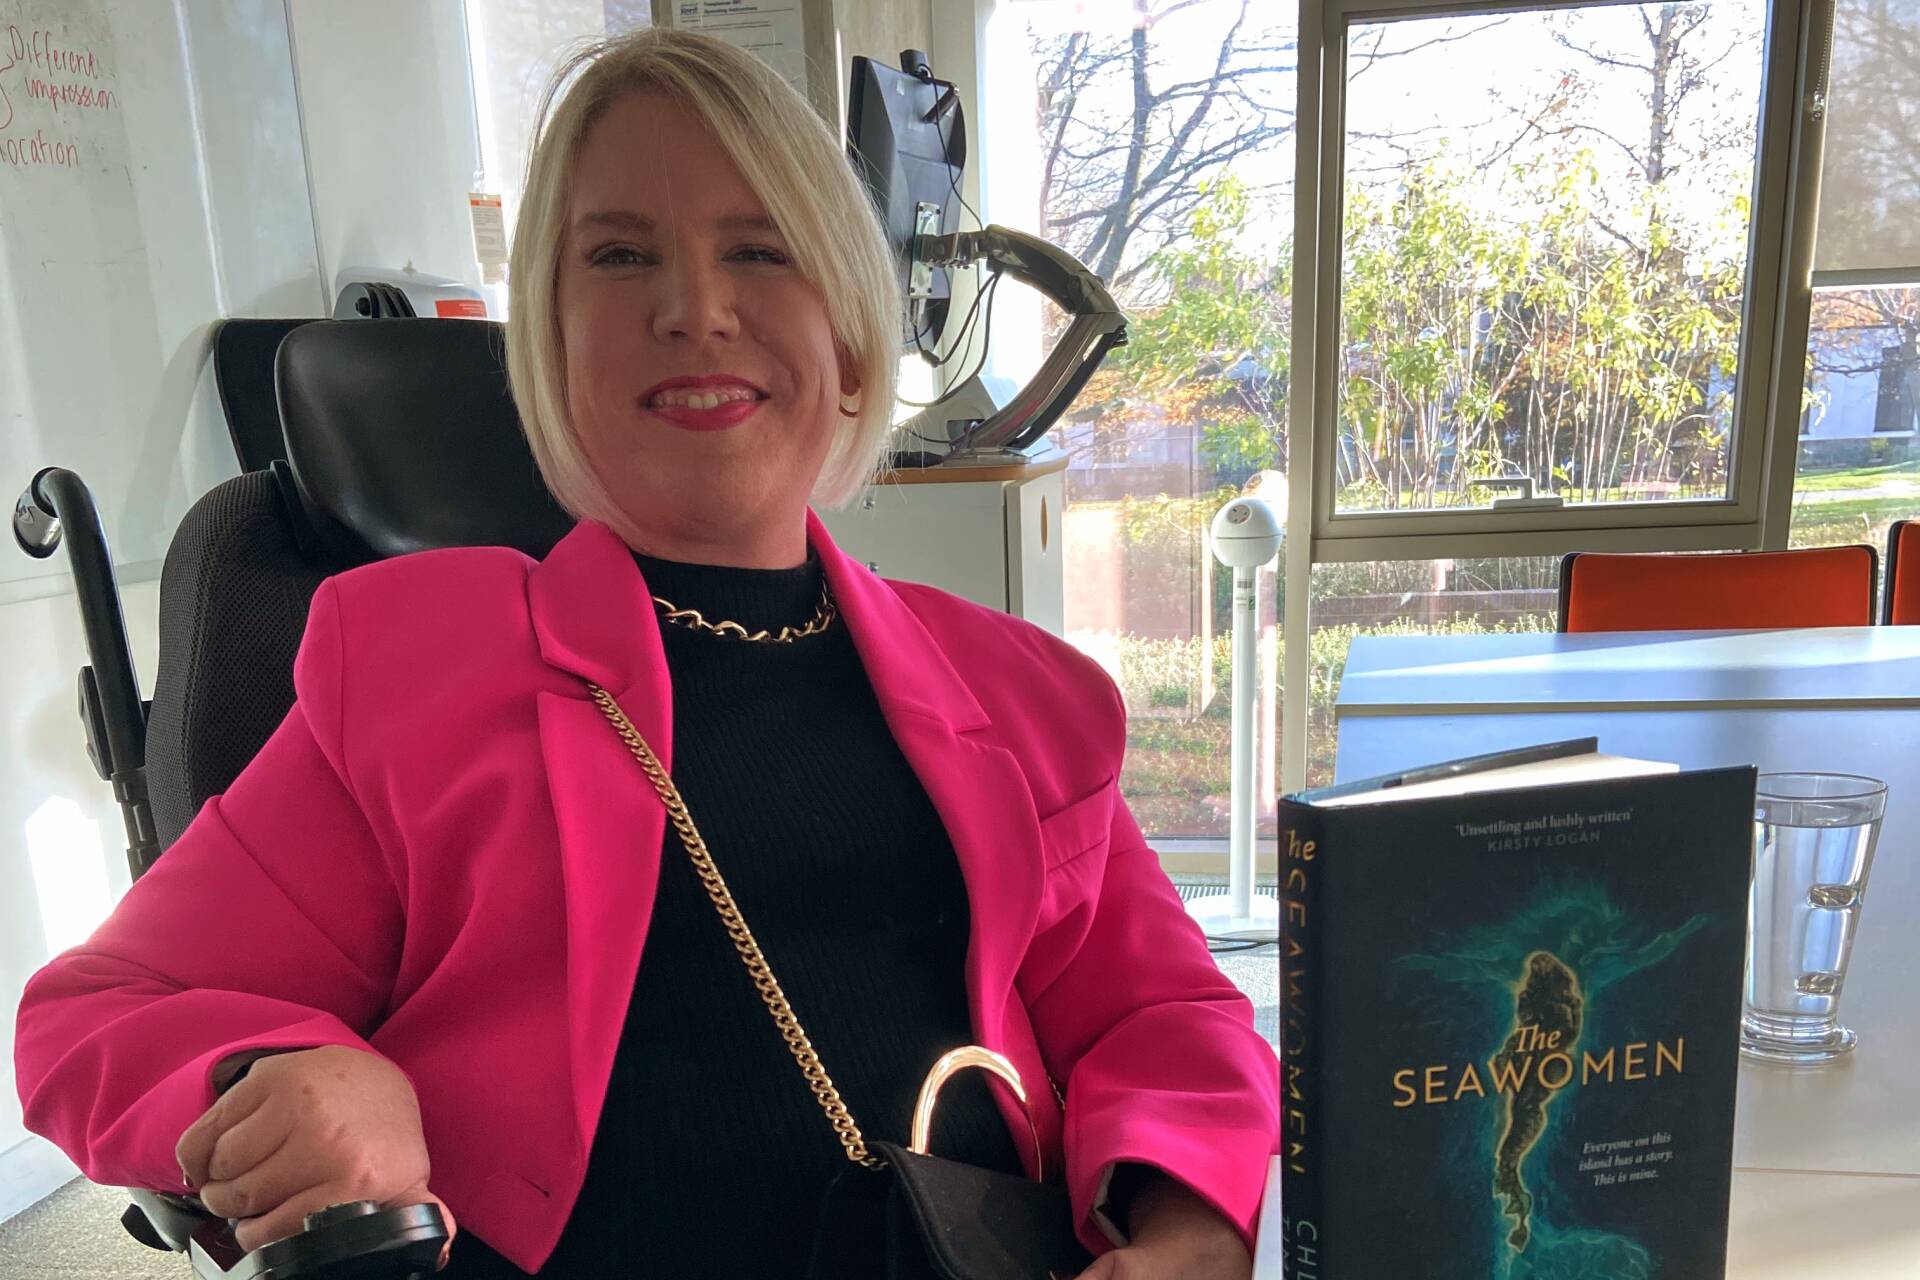 Chloe Timms with her book. Woman seated in wheelchair, with blonde hair and pink jacked. Book titled 'The Seawoman' on the table in front of her.